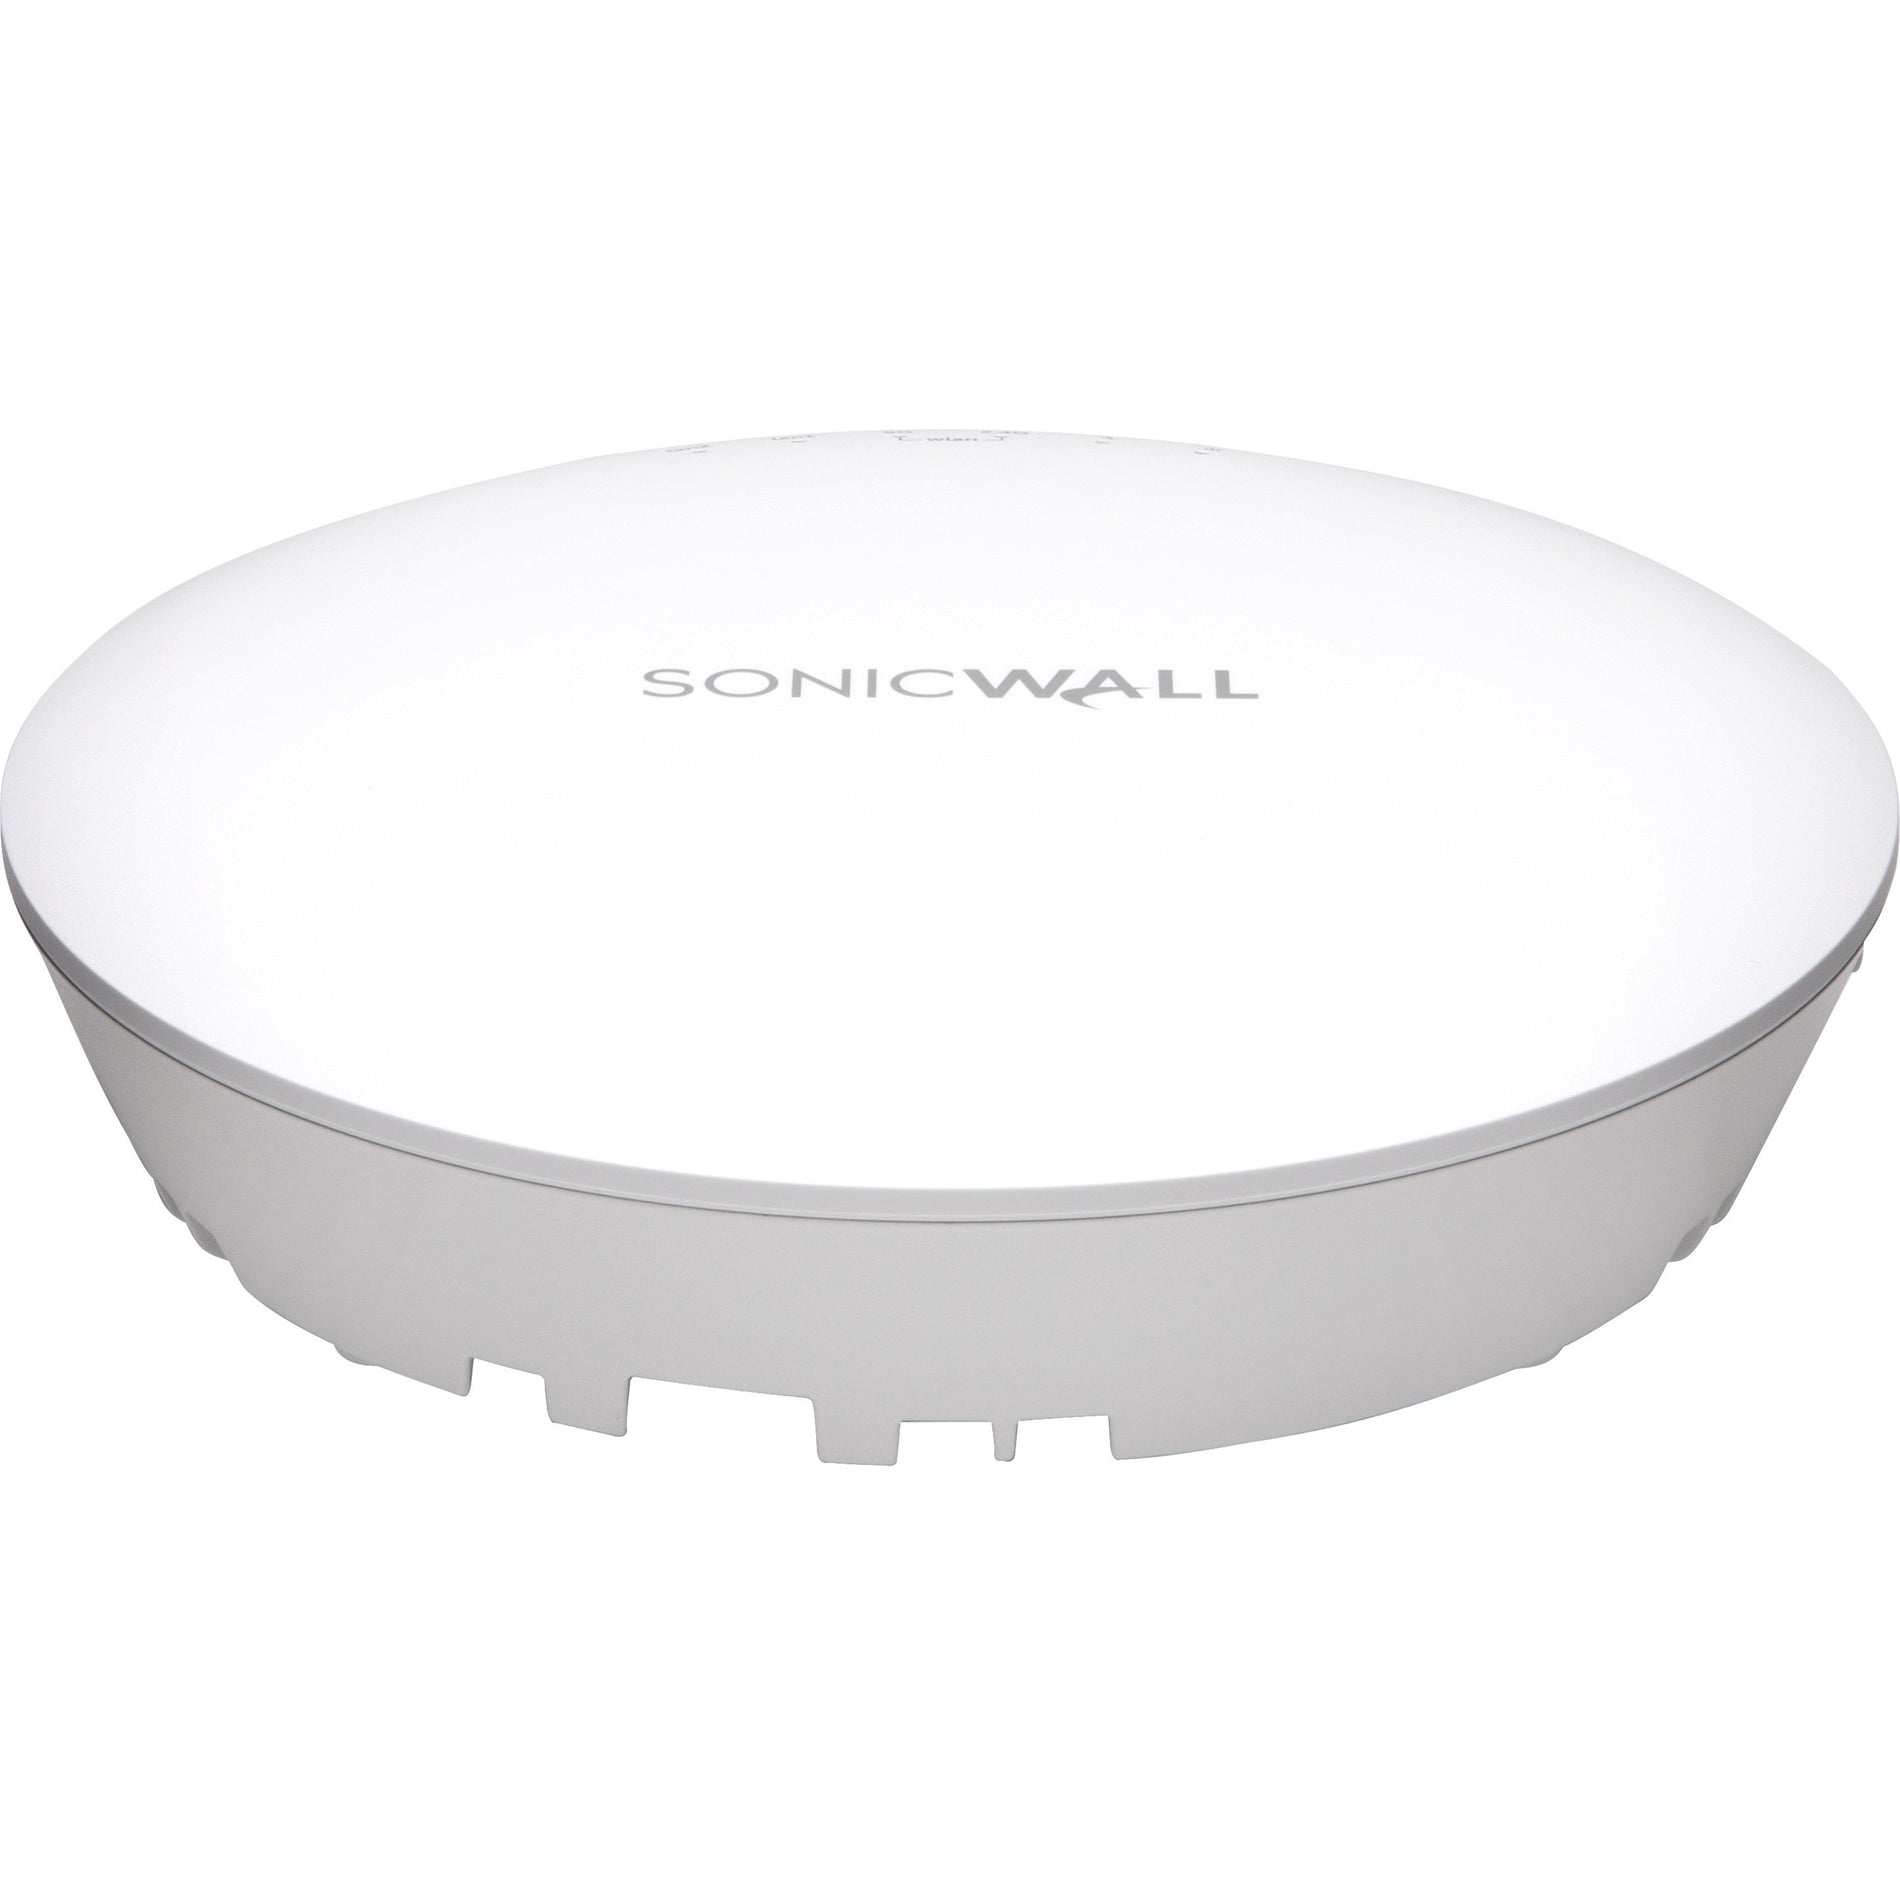 SonicWall 02-SSC-2630 SonicWave 432i Wireless Access Point, 8-Pack with Advanced Secure Cloud WiFi Management and Support 3YR (No PoE)